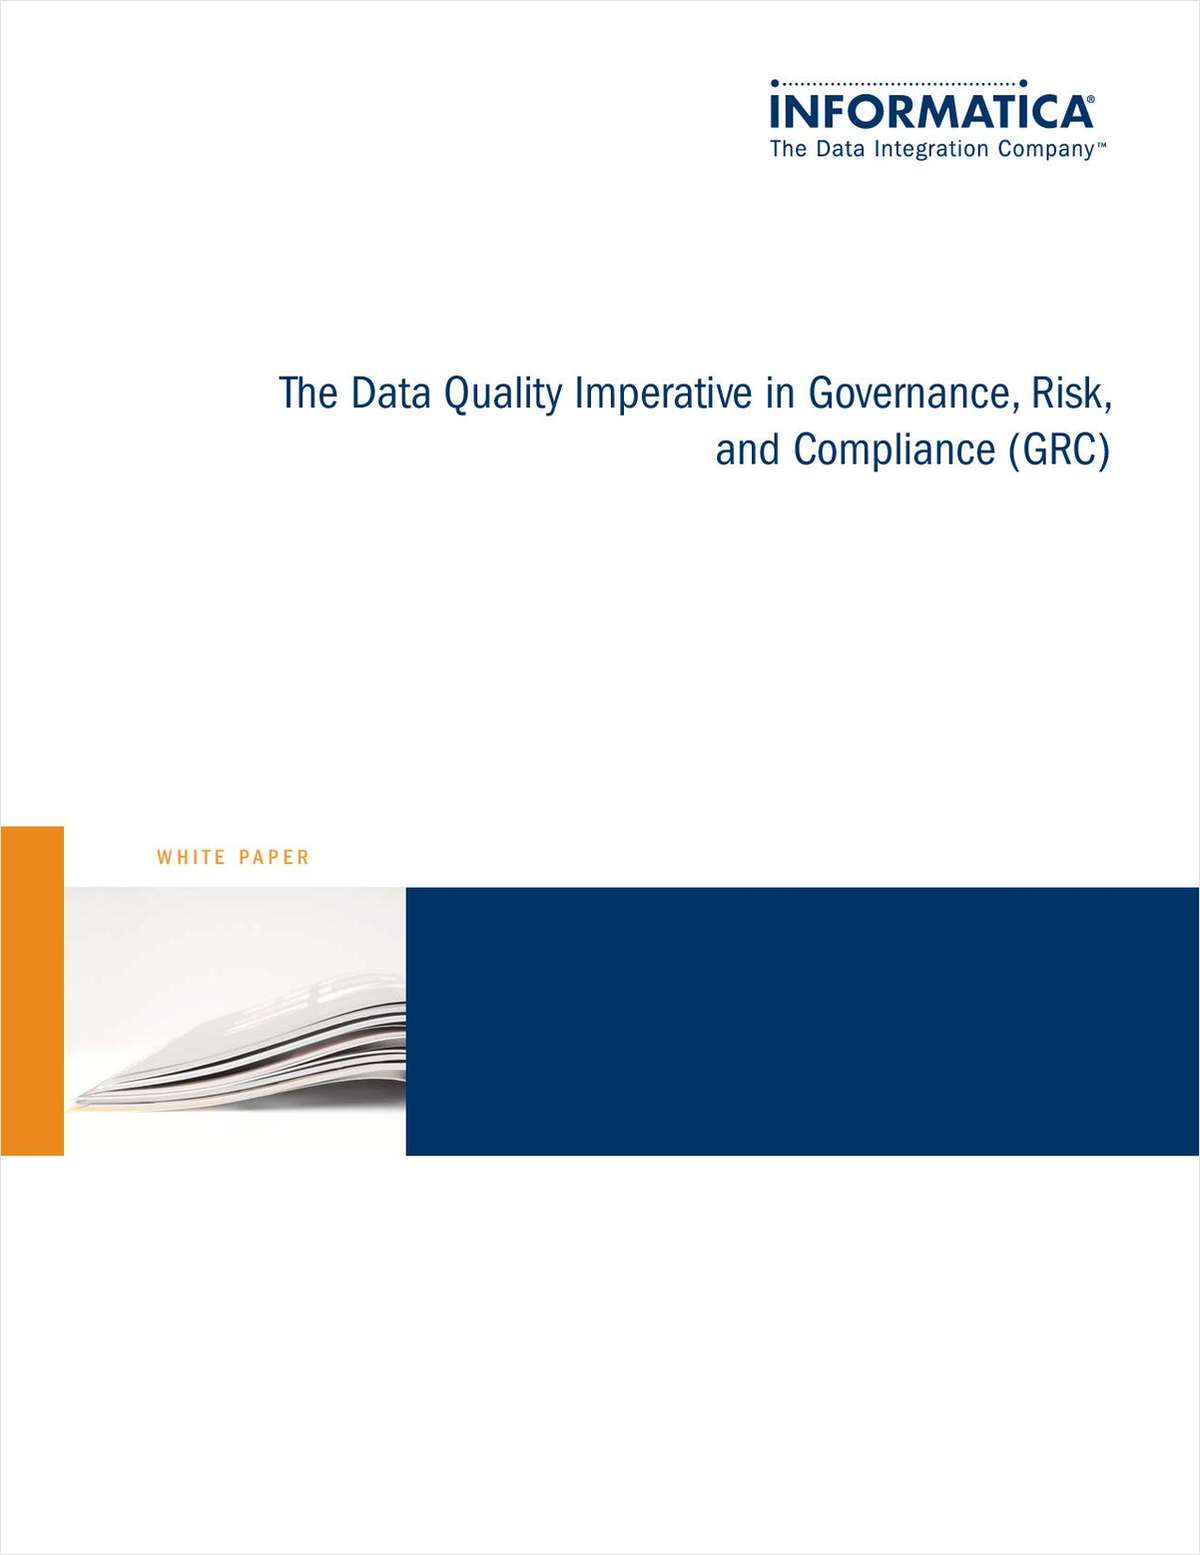 The Data Quality Imperative in Governance, Risk and Compliance